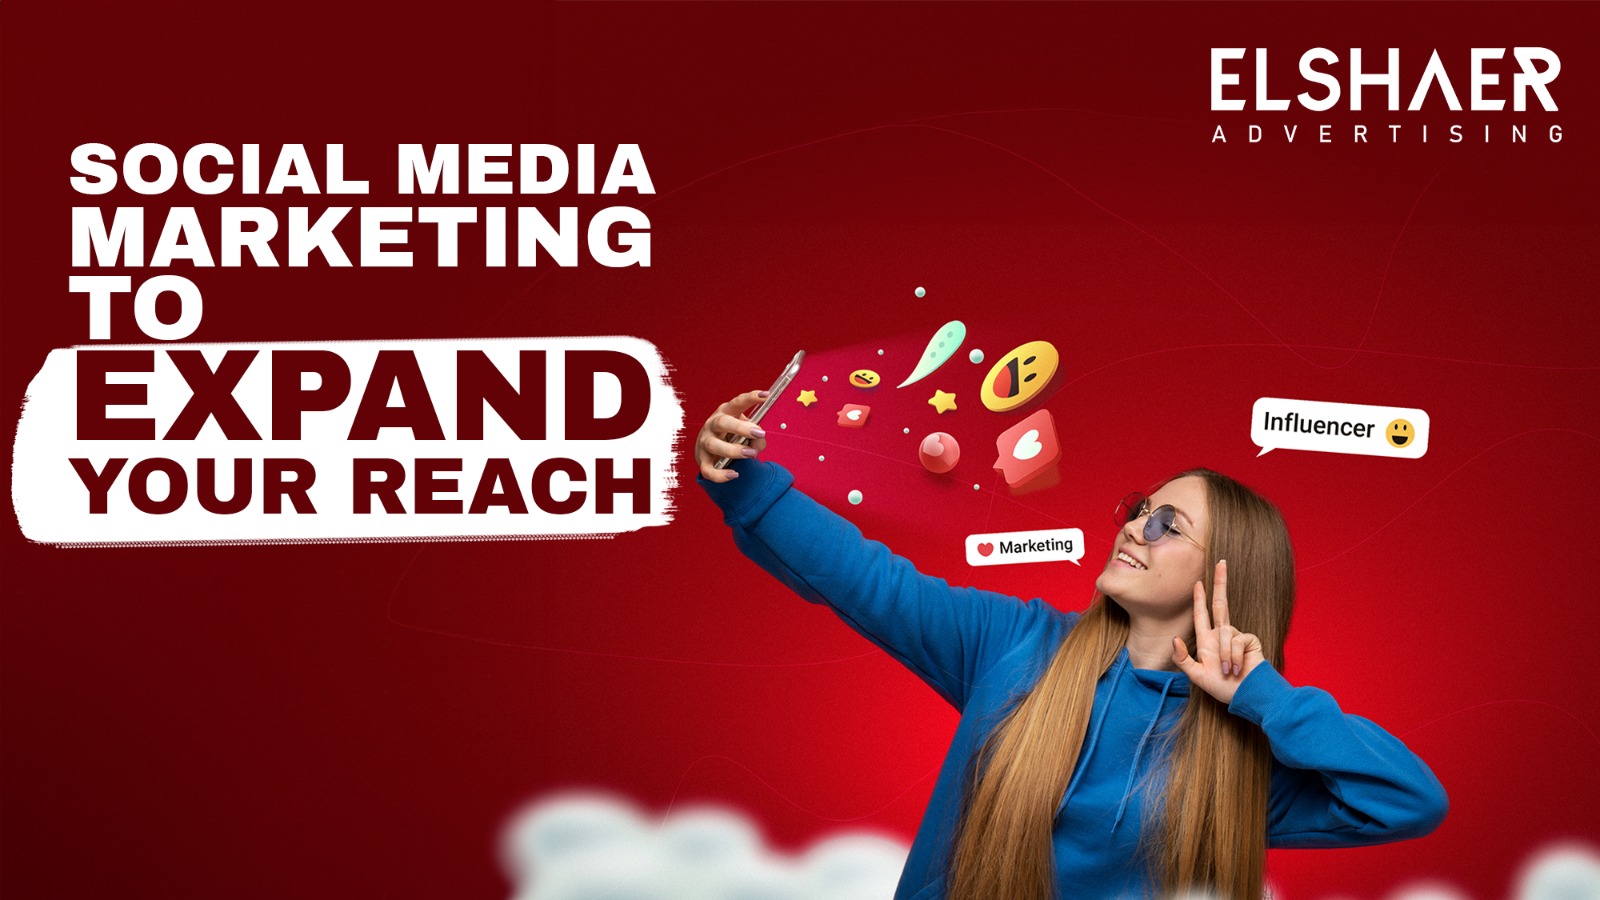 Use Social Media Marketing to expand your reach